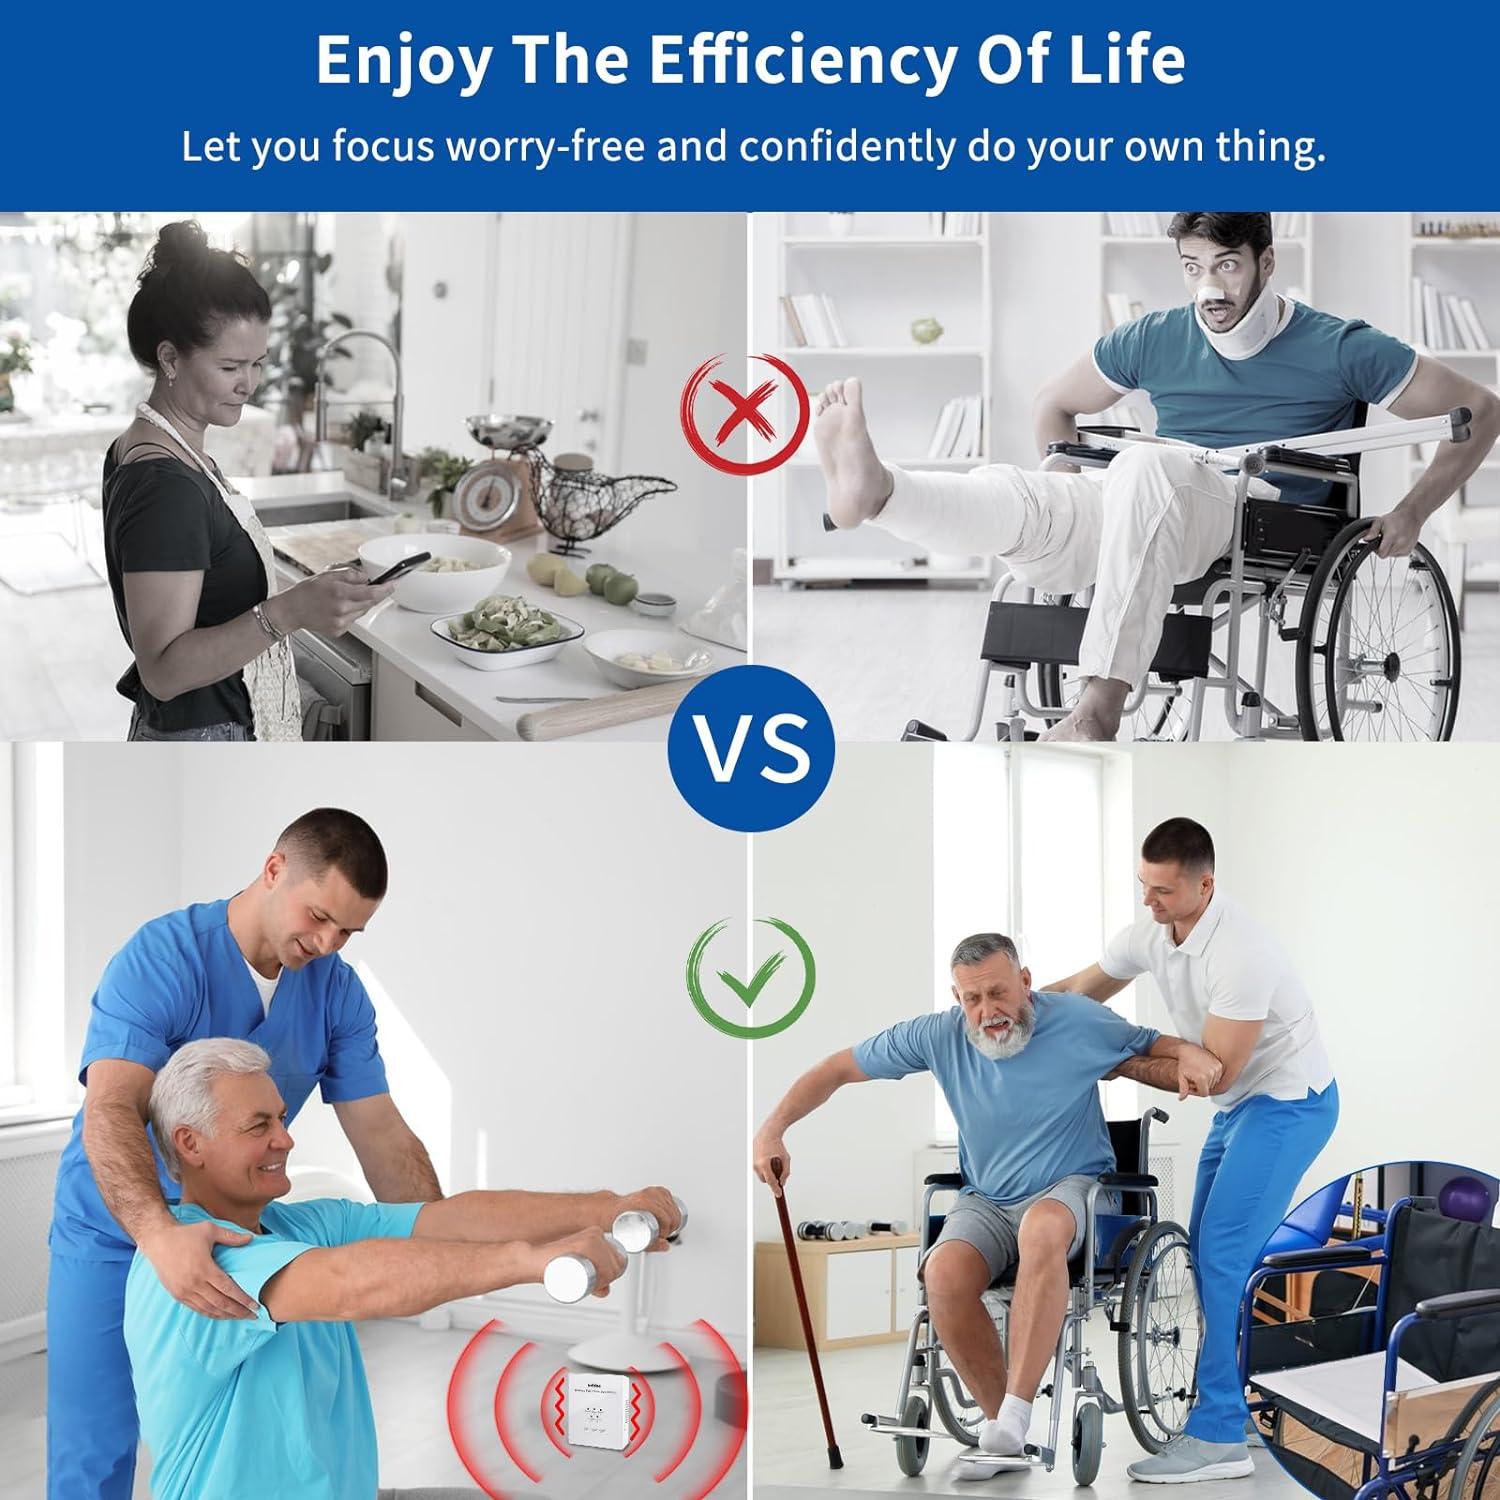 Briidea Wireless Chair Alarm for Elderly Dementia Patients Ensuring Fall Prevention with Multiple Alarm Modes, Easy-Clean 10x15 Inch PVC Pad, 600 Ft Range, Allows Connection of 3 Pads Simultaneously - briidea